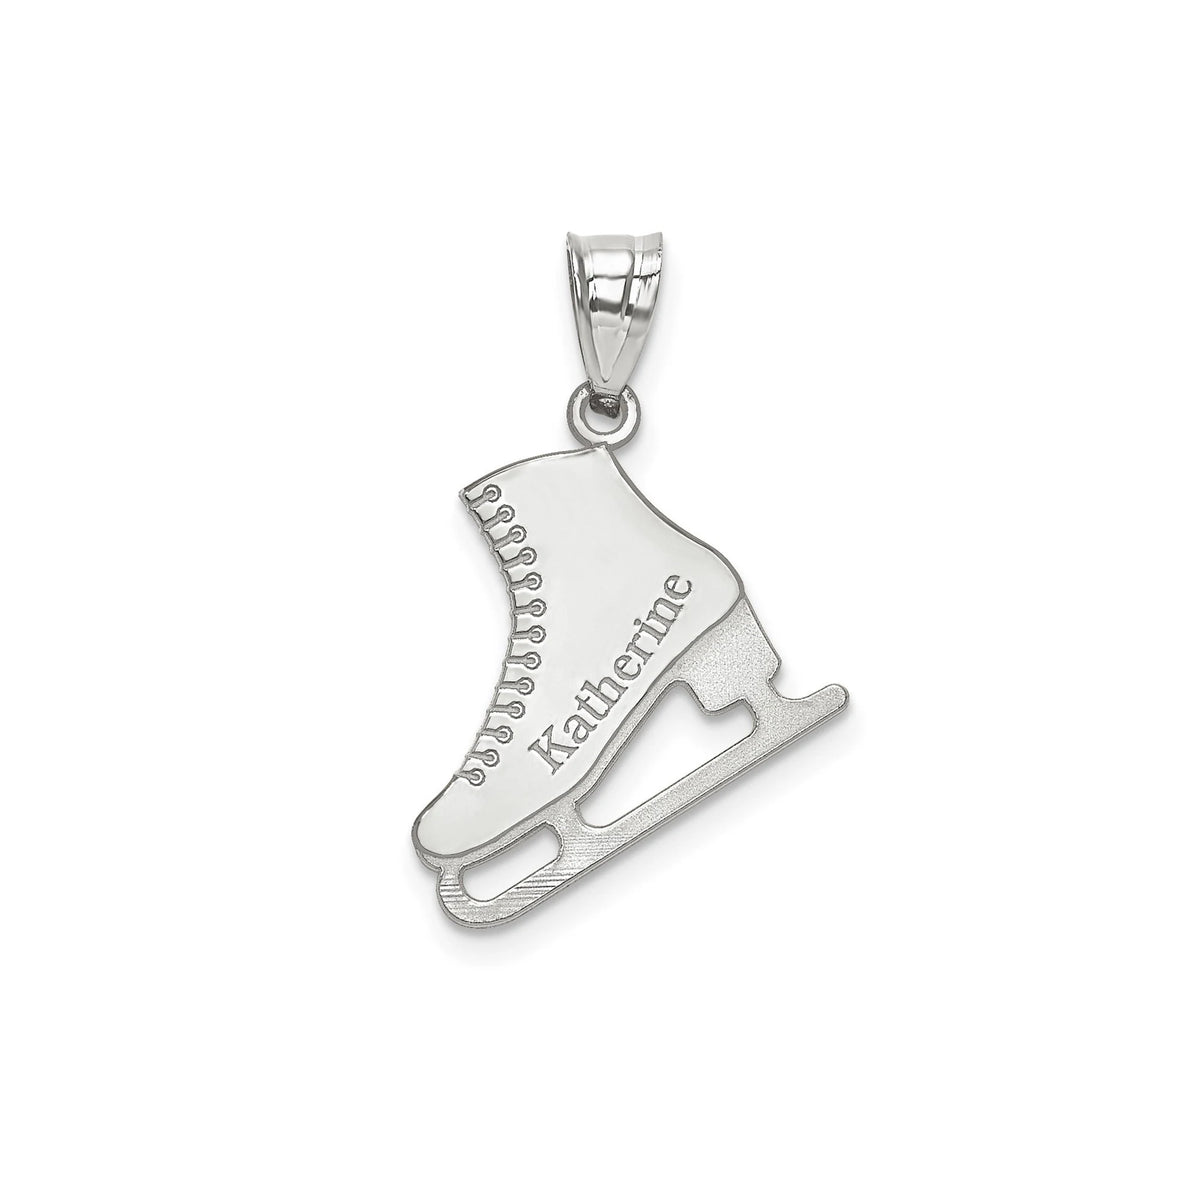 Personalized Ice Skate w/ Name & Necklace included  in Sterling Silver , Gold Plated or 10k Gold Laser Engraved Ice Skating